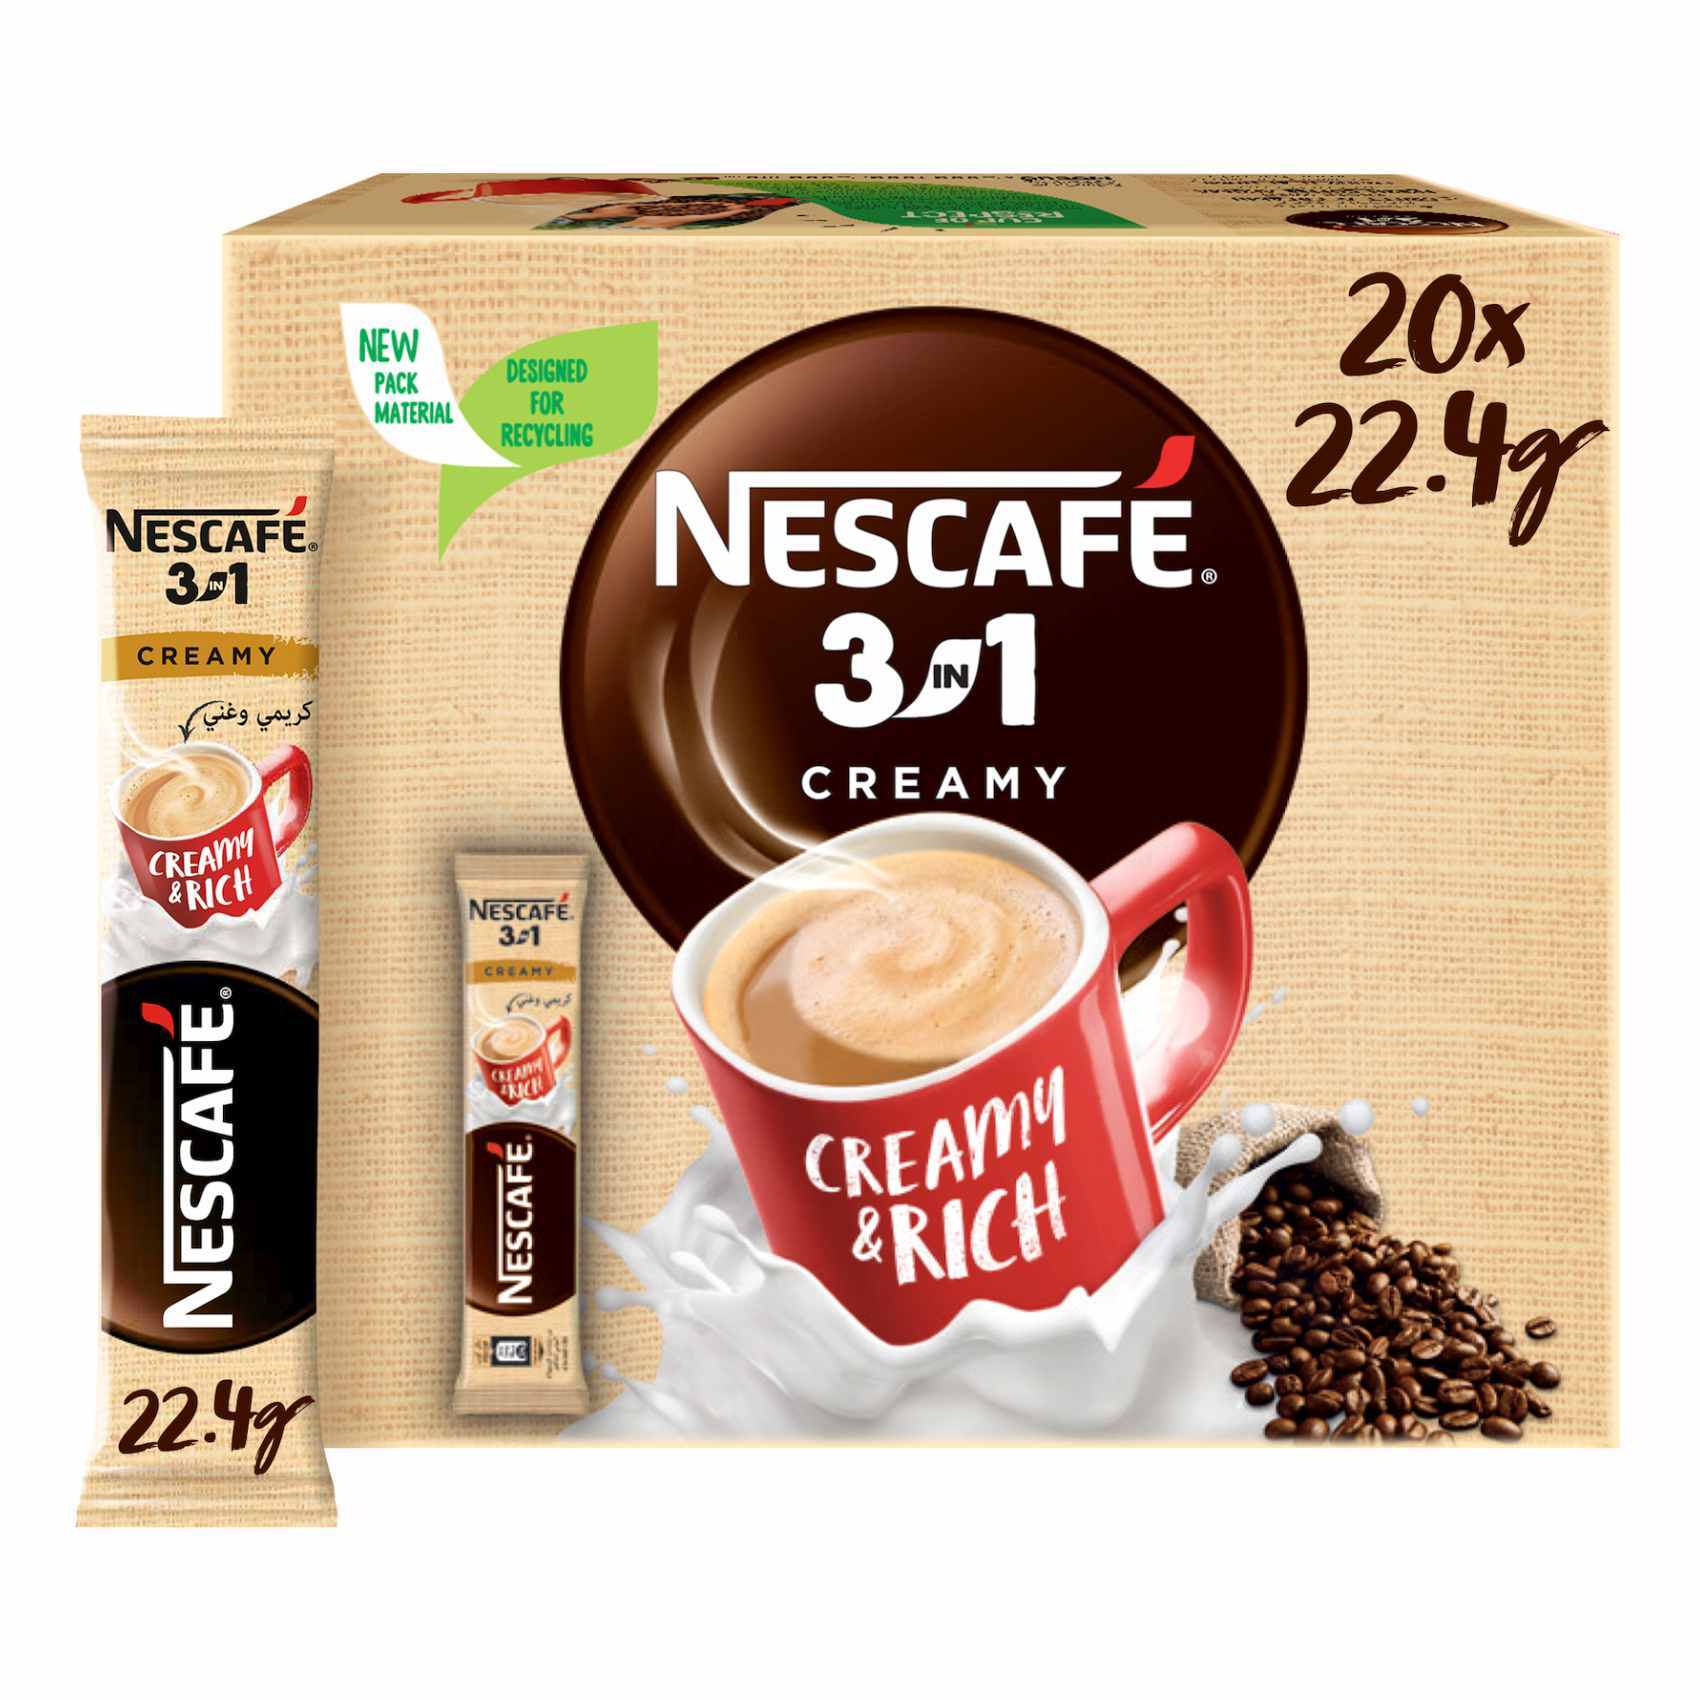 Buy Nescafe 3-In-1 Creamy Latte Creamy And Rich Instant Coffee Mix 22.4g  Pack of 20 Online - Shop Beverages on Carrefour UAE